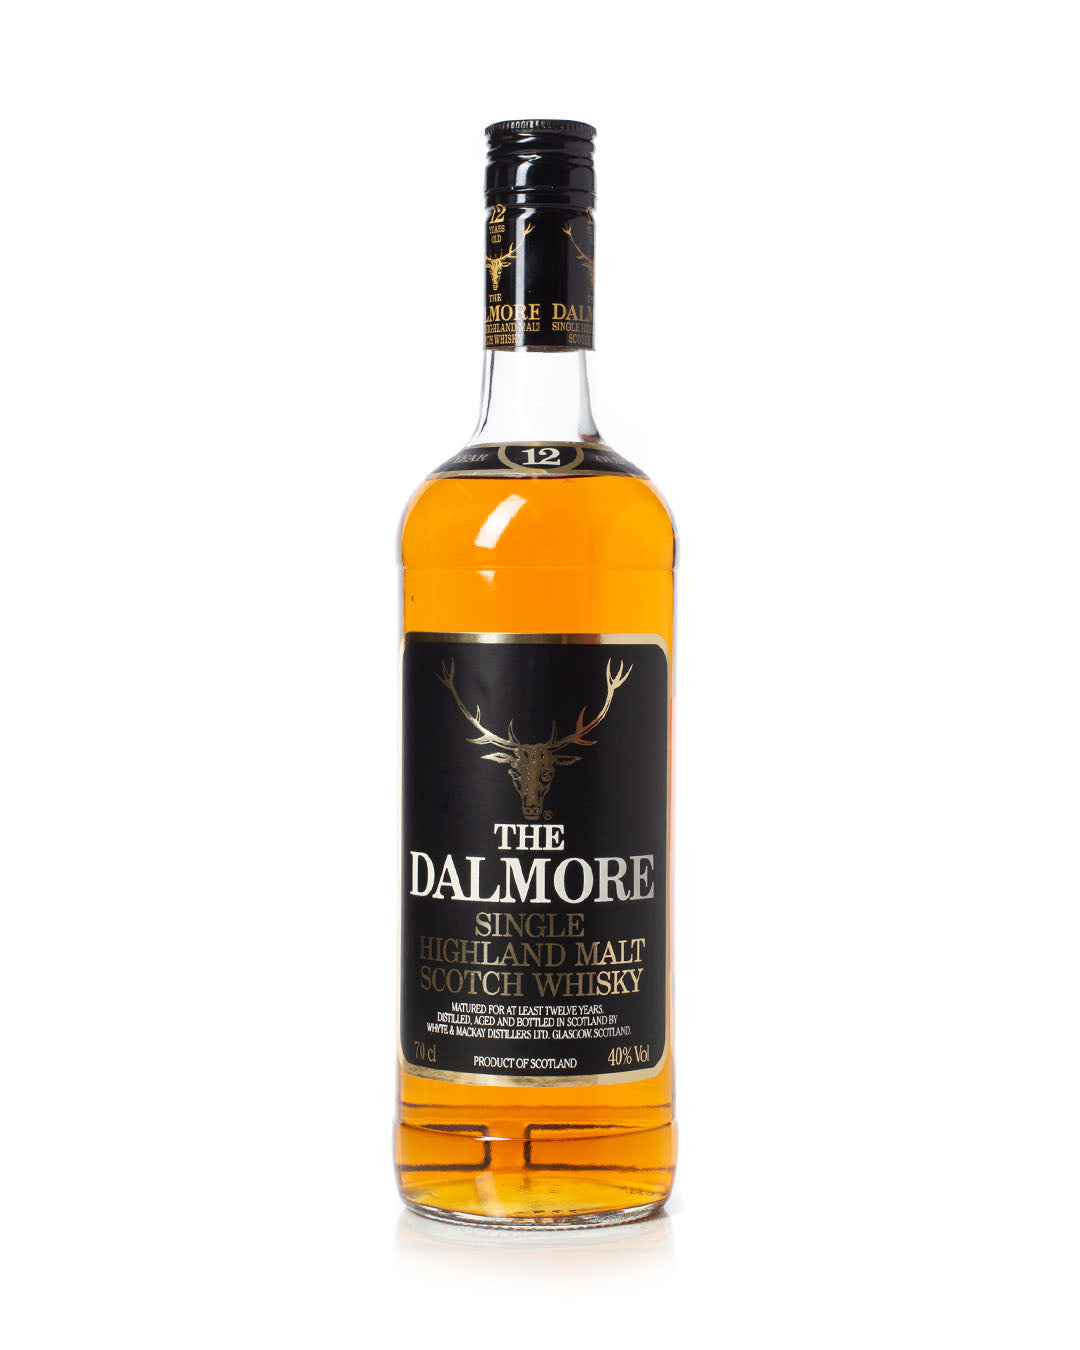 Buy Dalmore 12 year old online